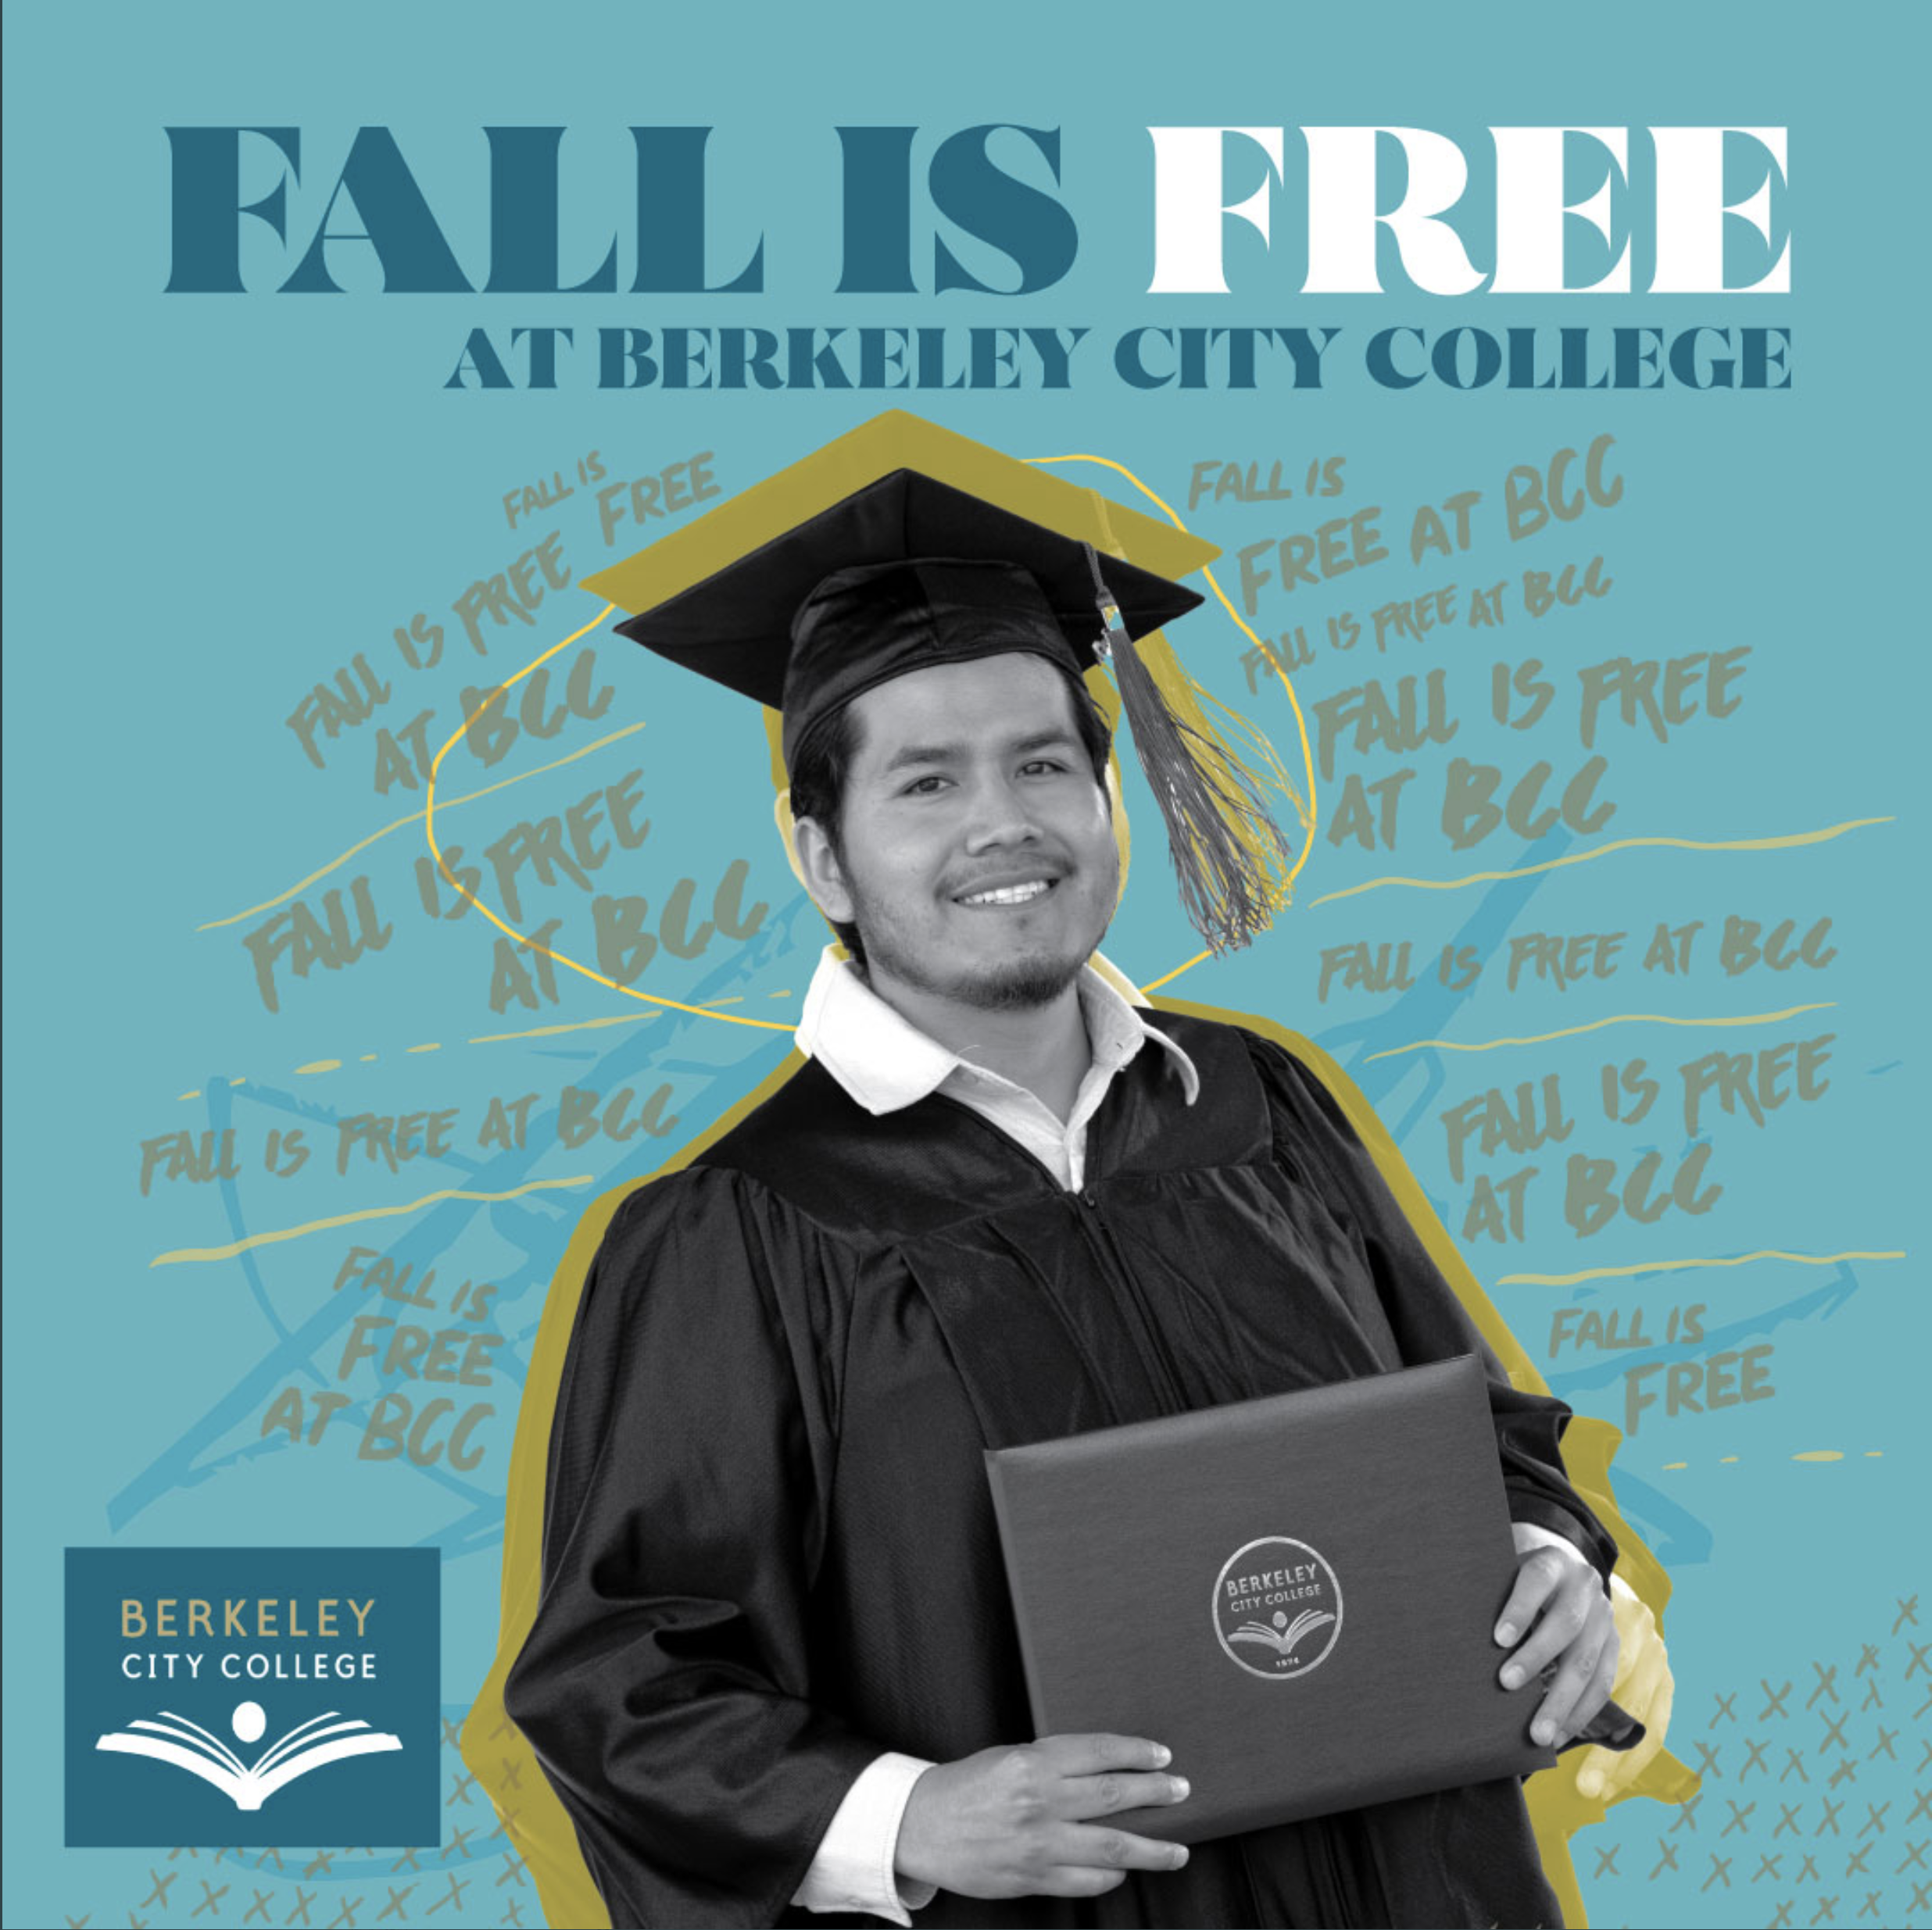 Fall is Free at BCC with student in graduation cap and gown